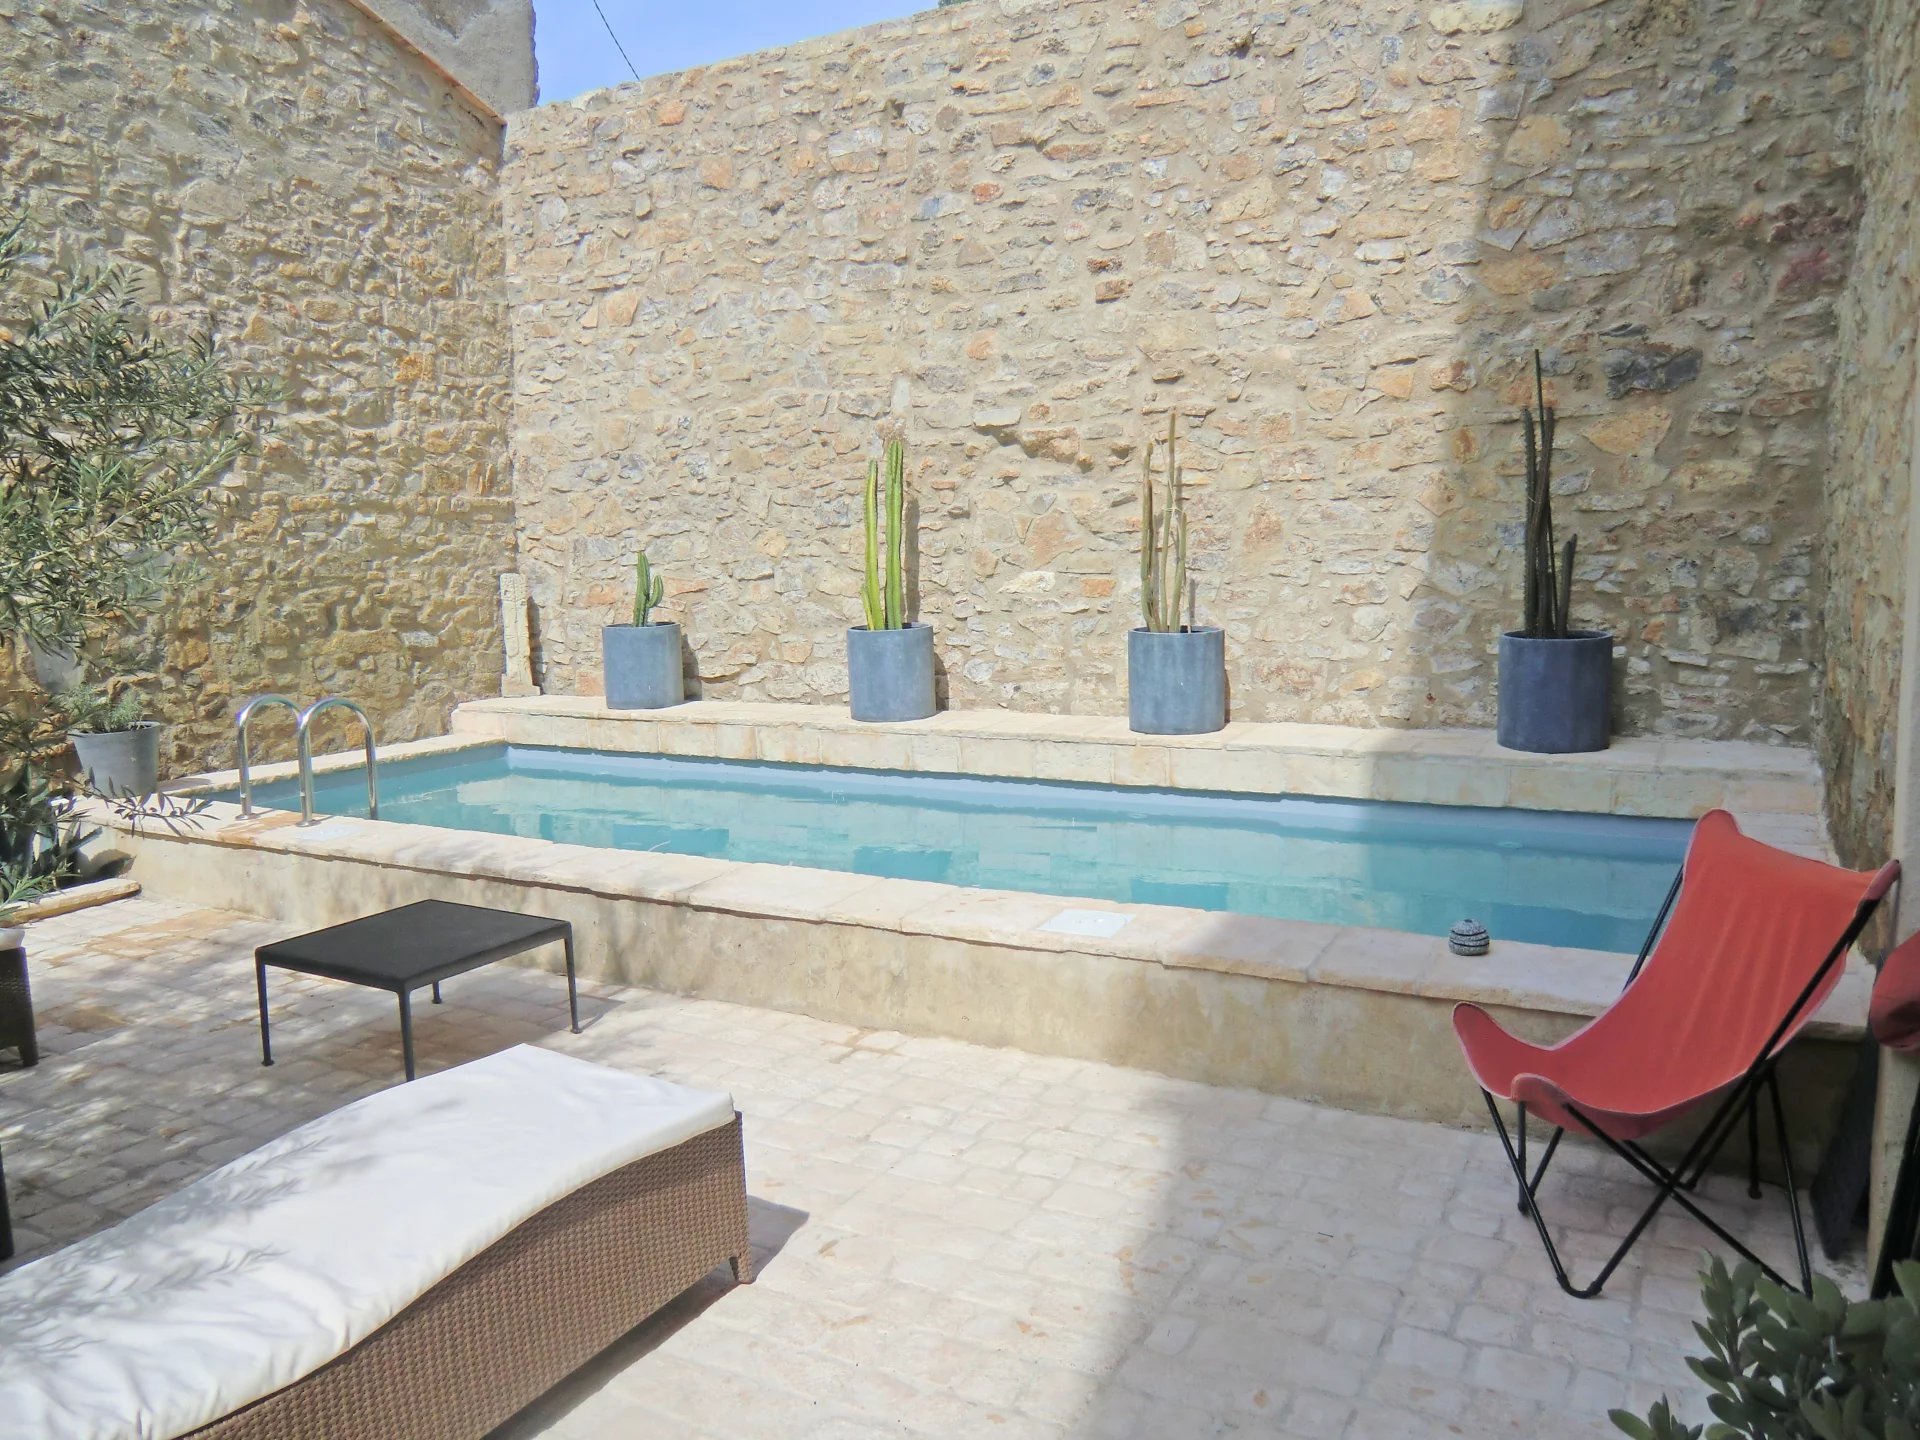 SUPERB MASTER HOUSE WITH POOL, DURBAN CORBIERES AREA